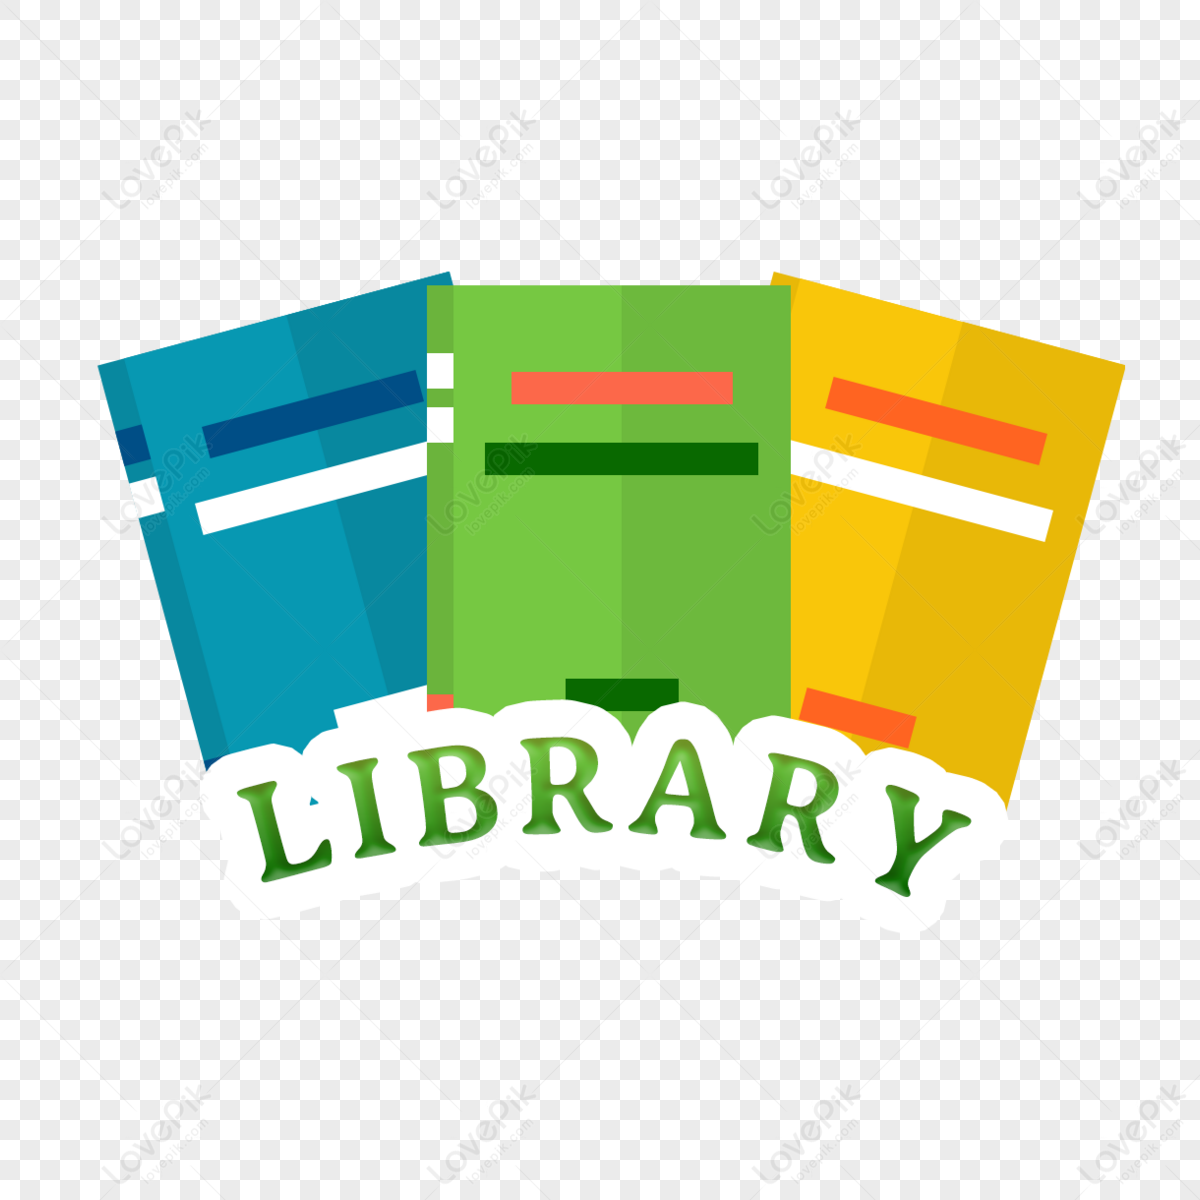 Green book placement library,knowledge,books,reading png free download